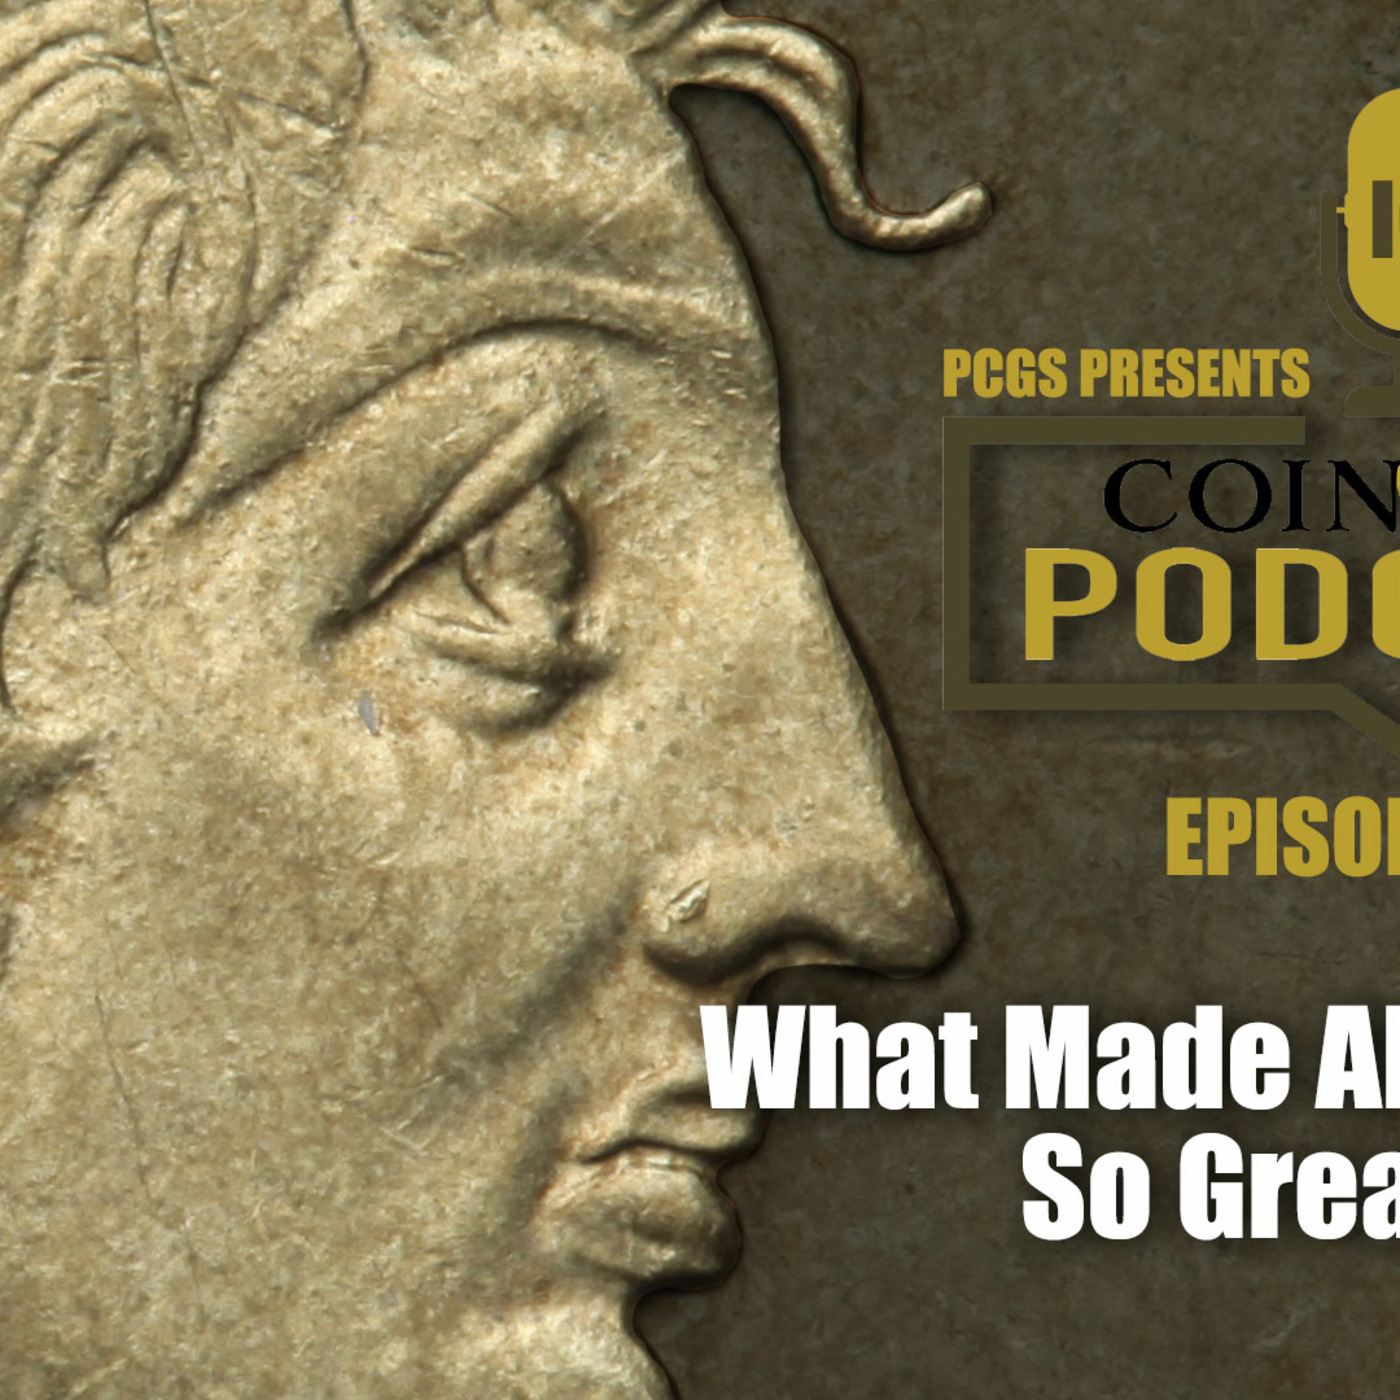 CoinWeek Podcast #140: What Made Alexander Great?